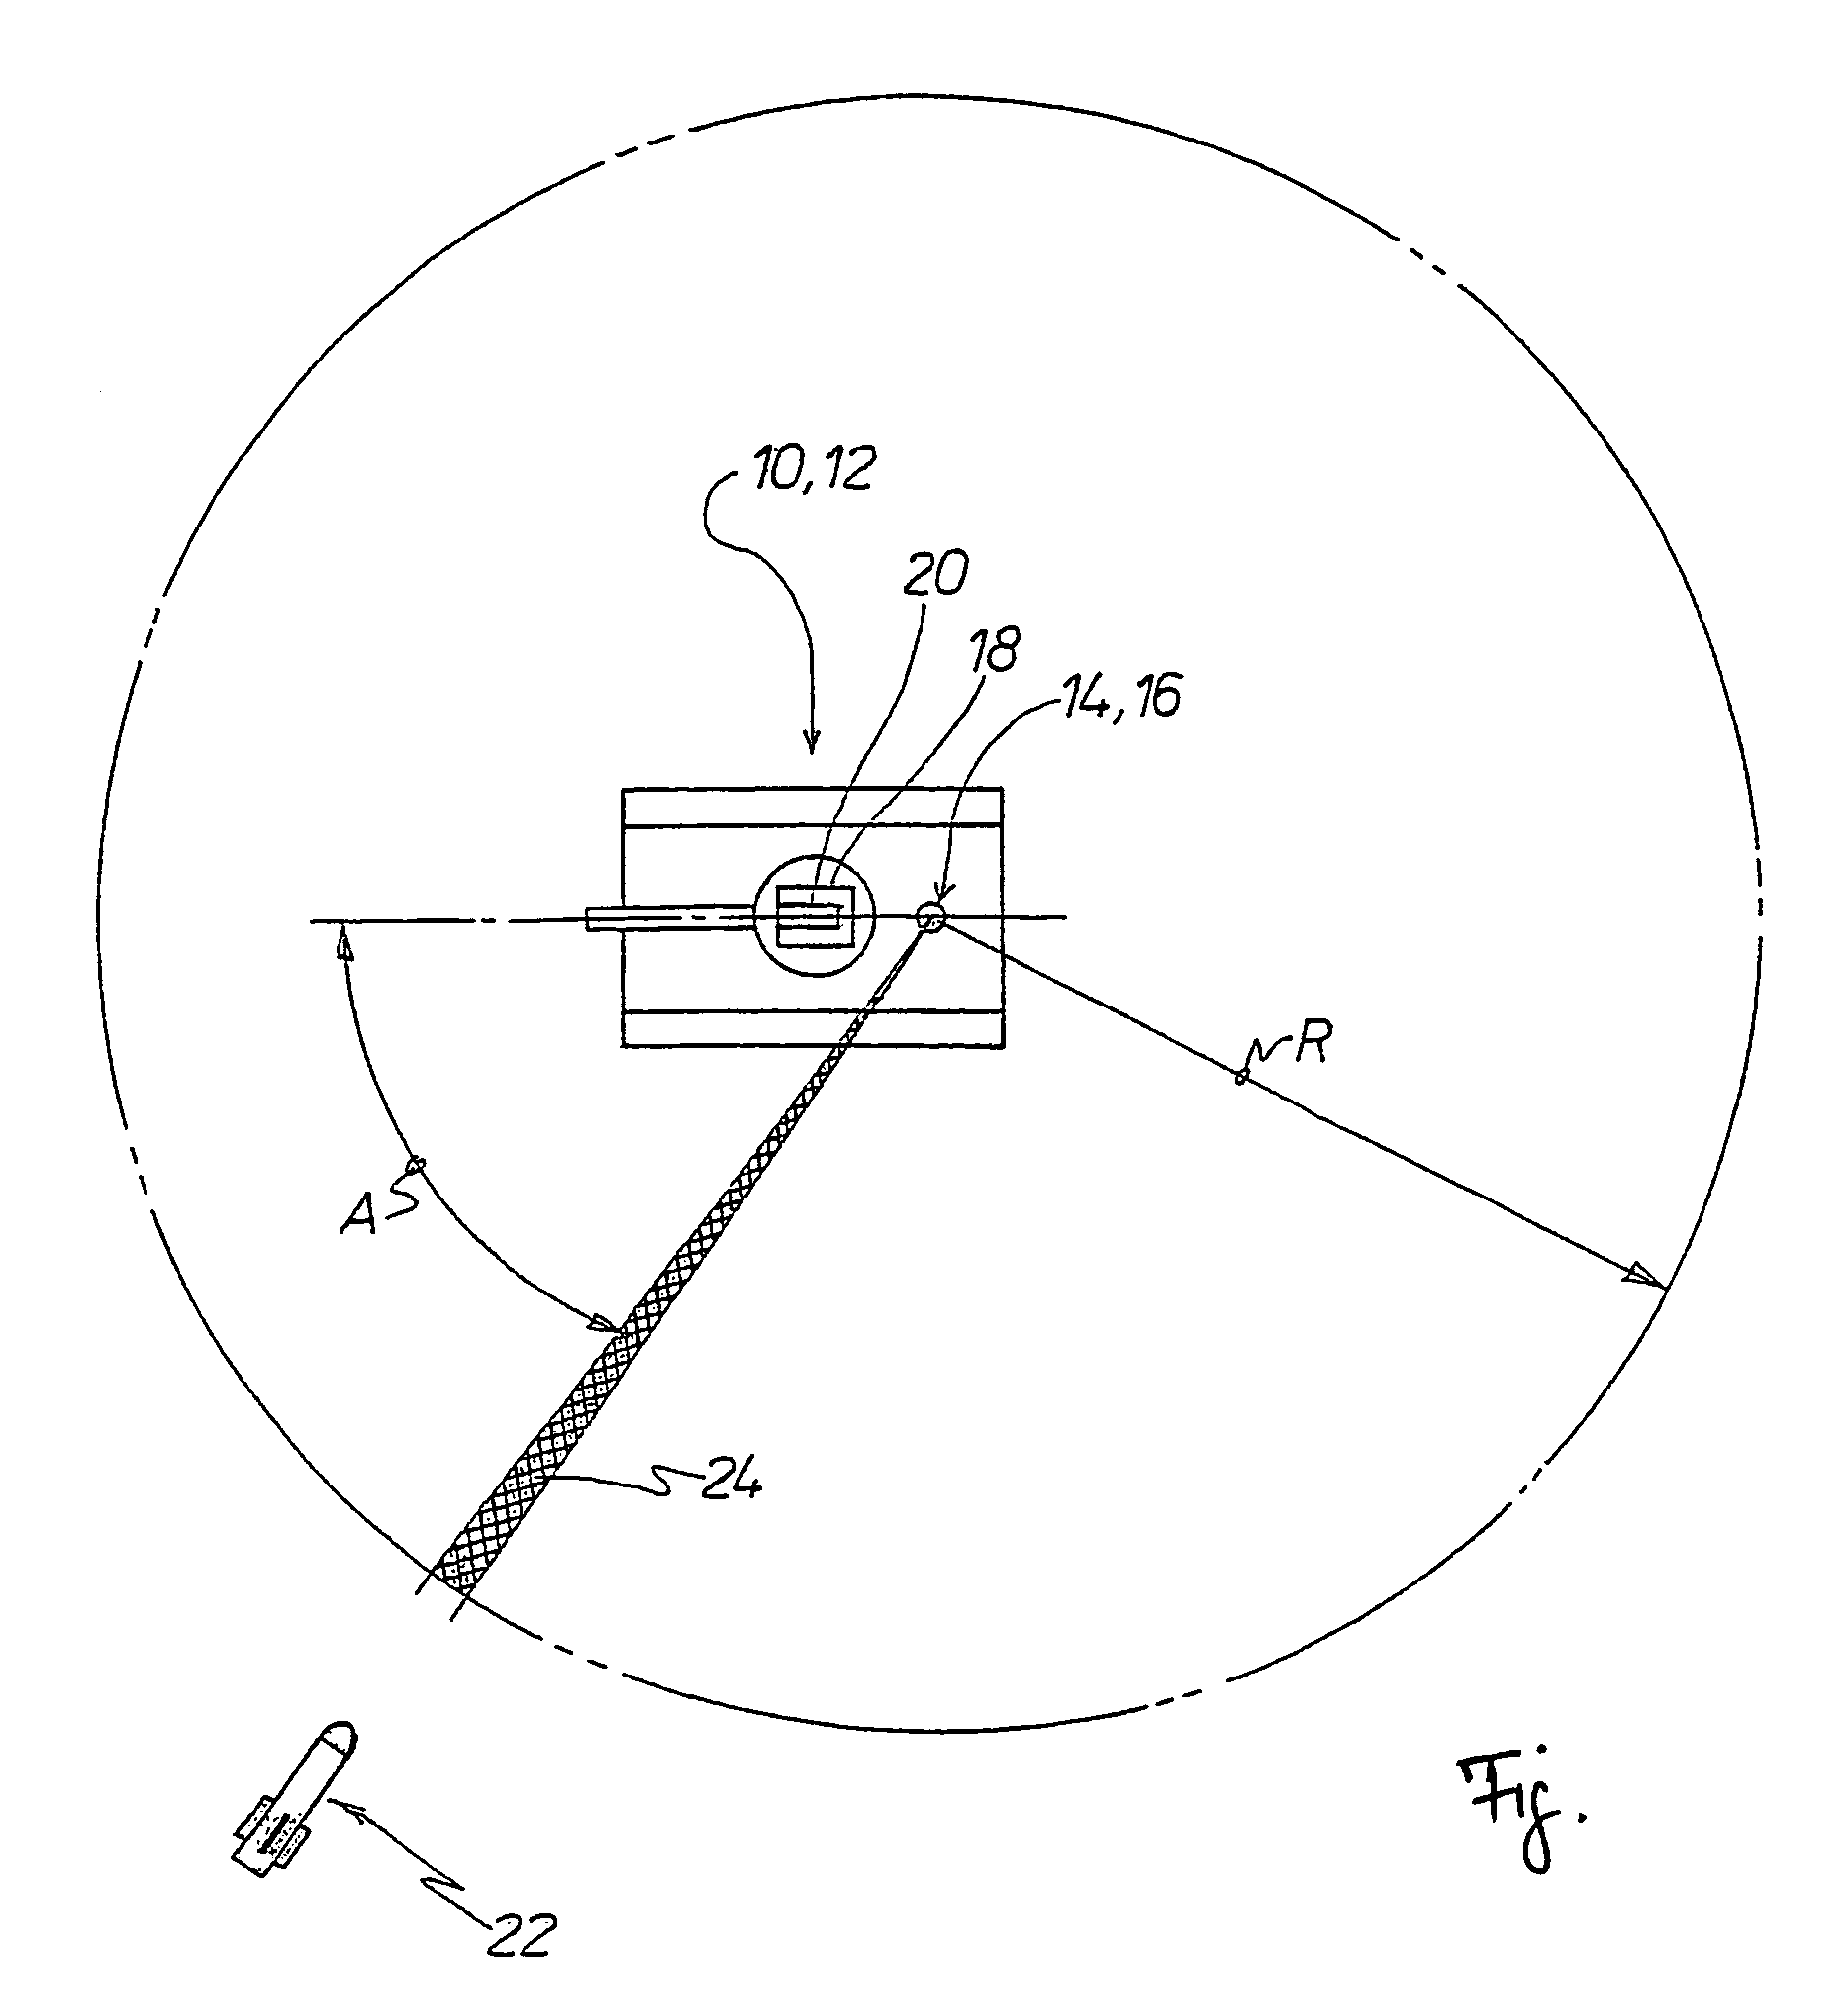 Self-protecting device for an object